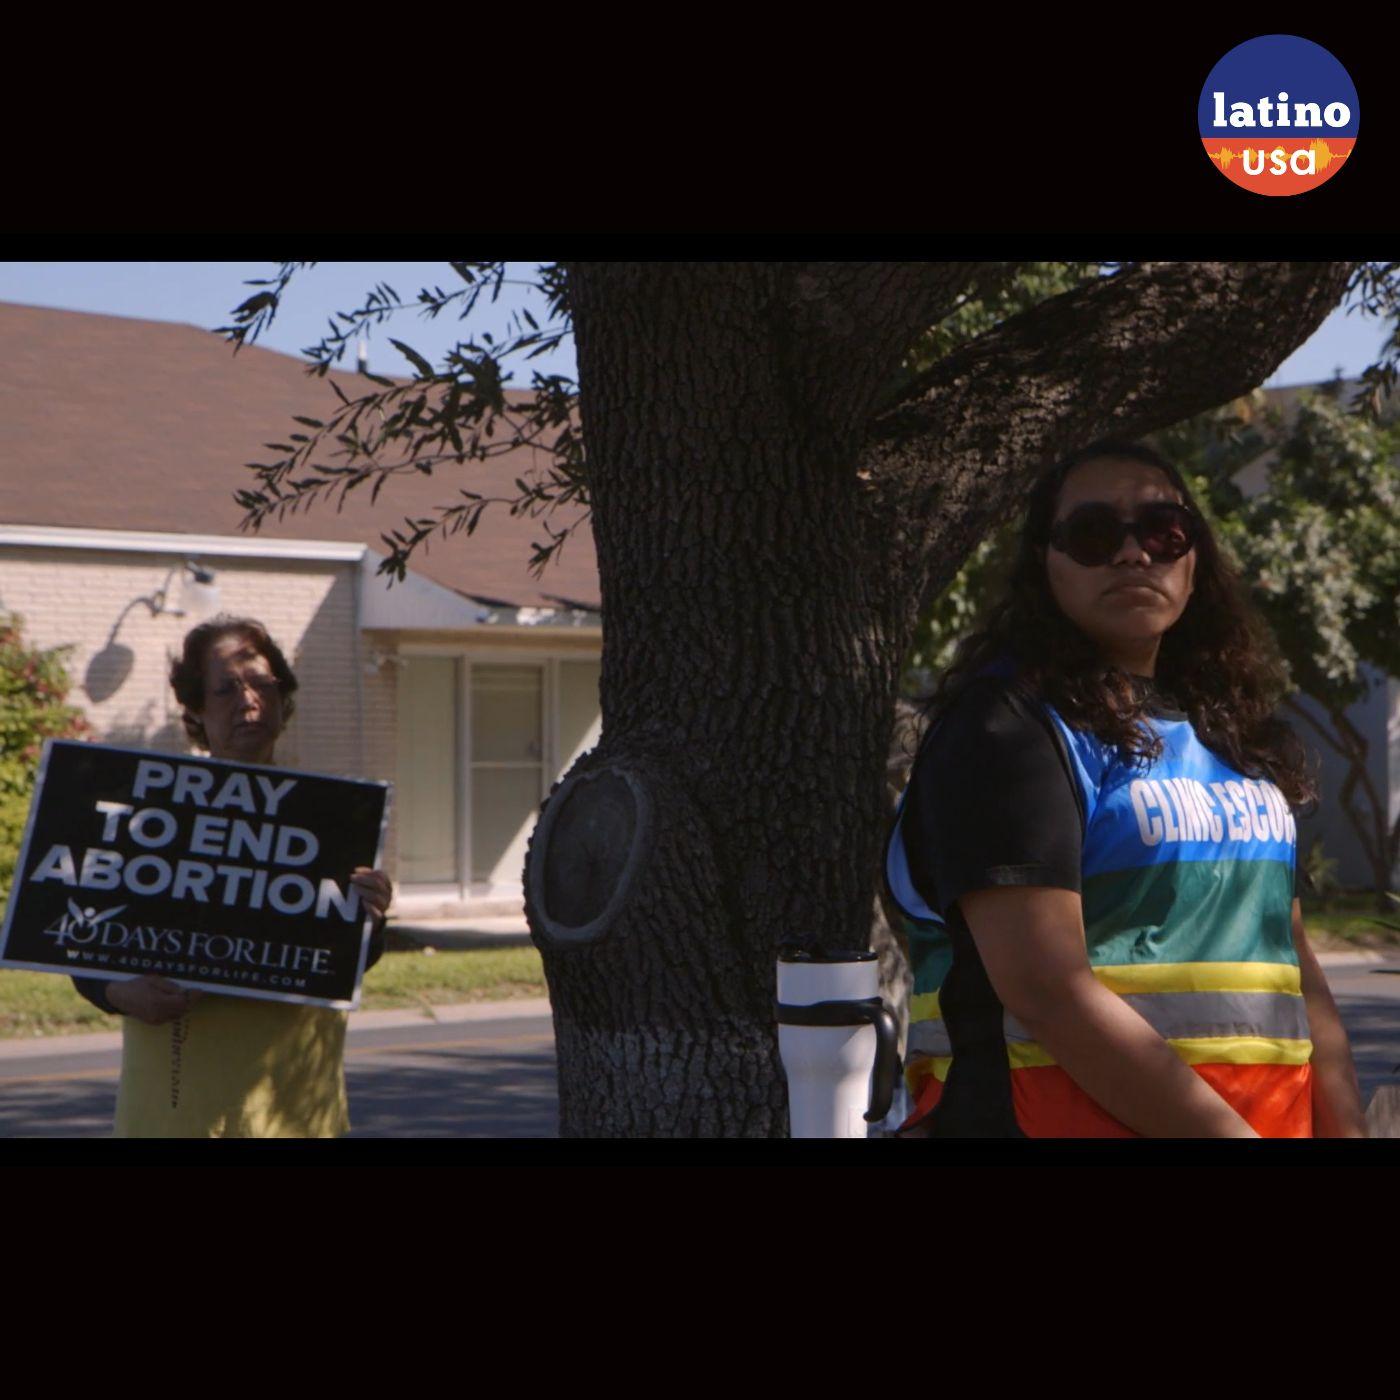 Thumbnail for "‘On the Divide’: Fighting for Choice in the Rio Grande Valley".